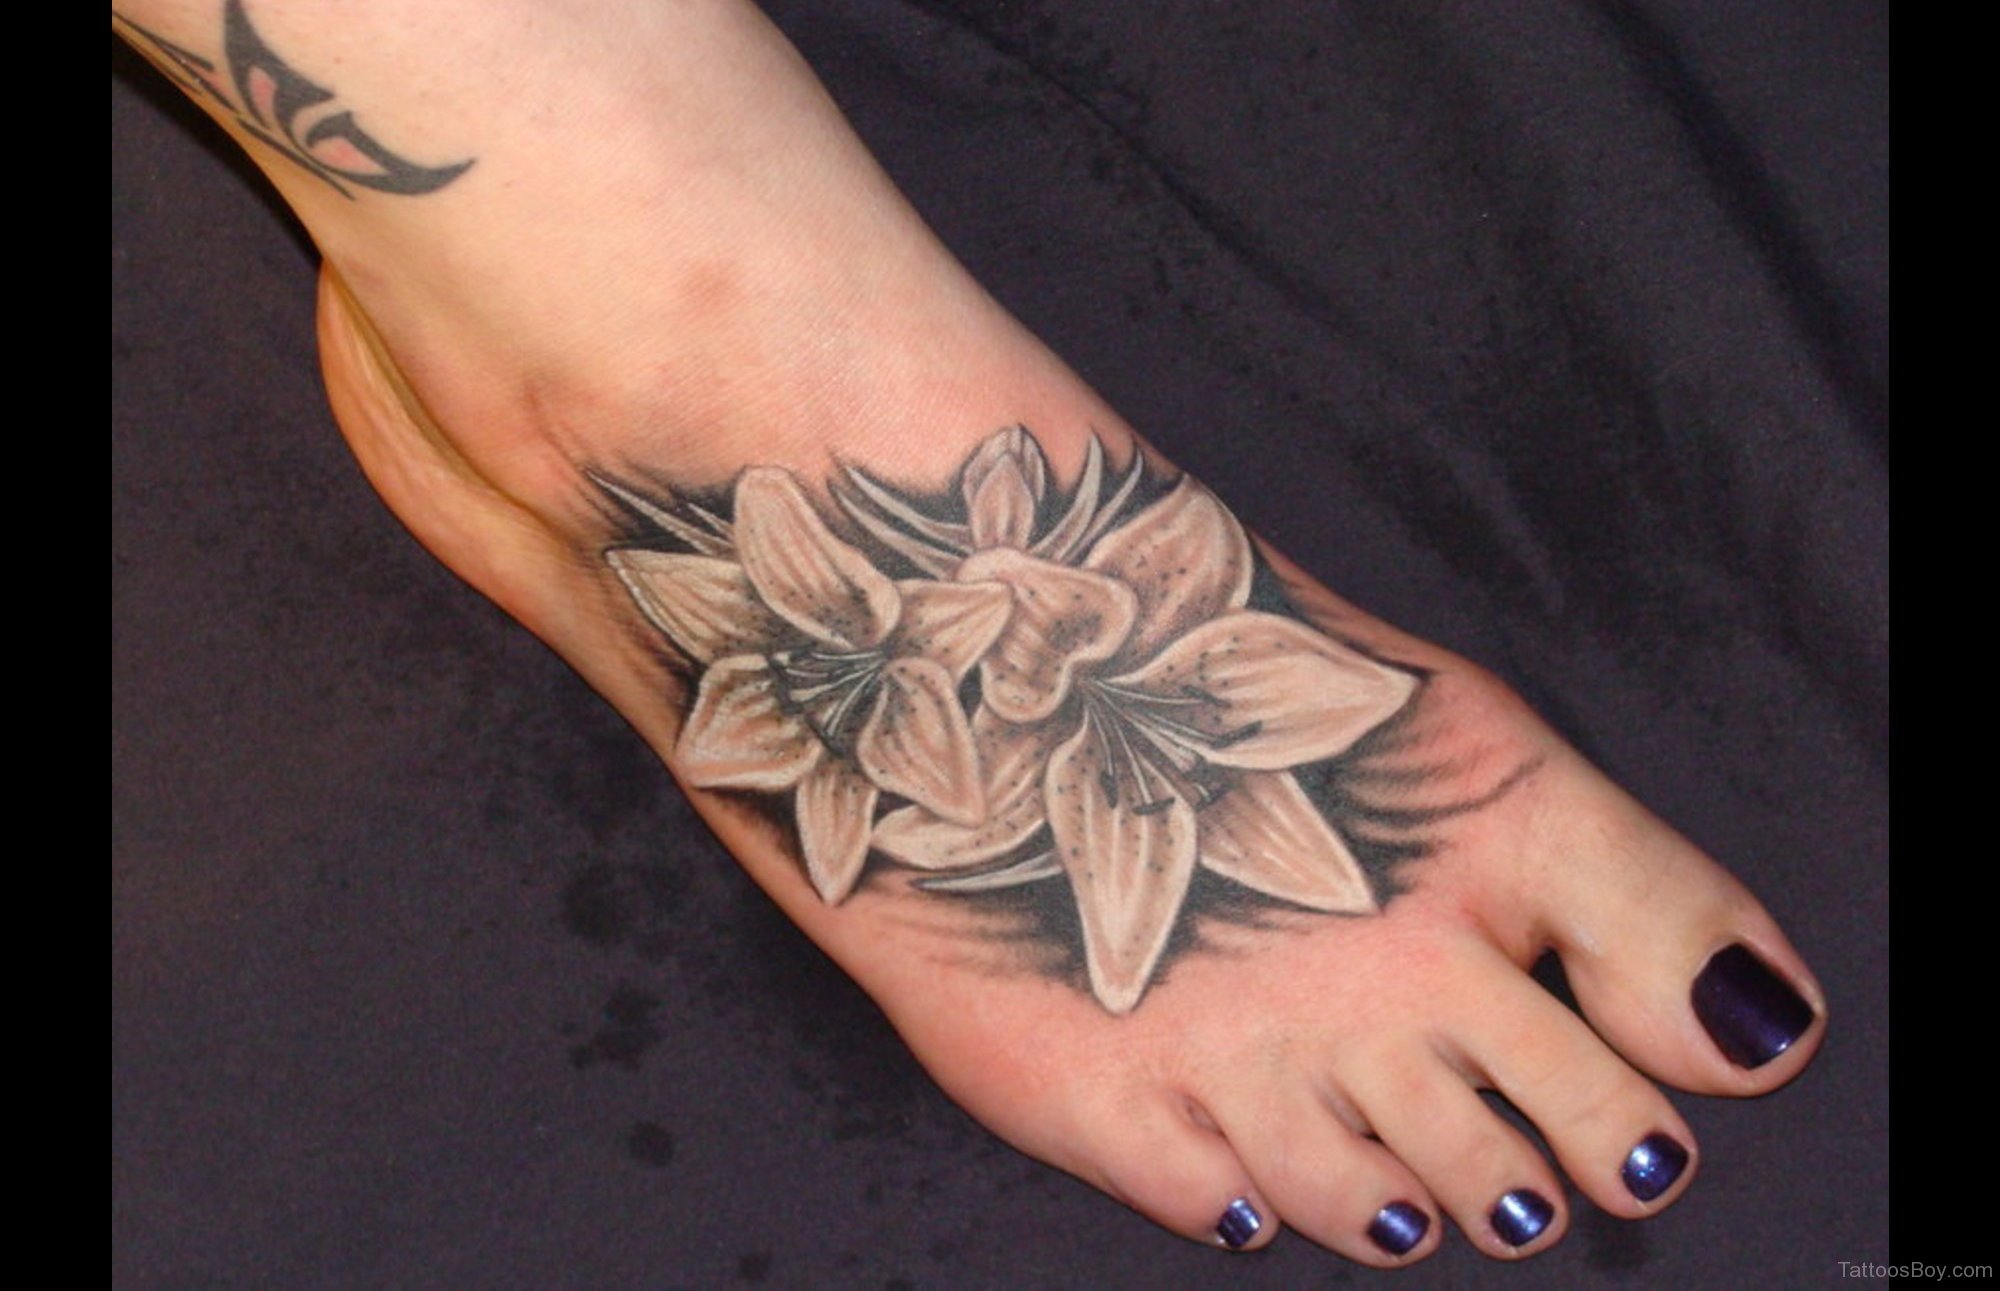 Violet flower tattoo on the ankle - Tattoogrid.net